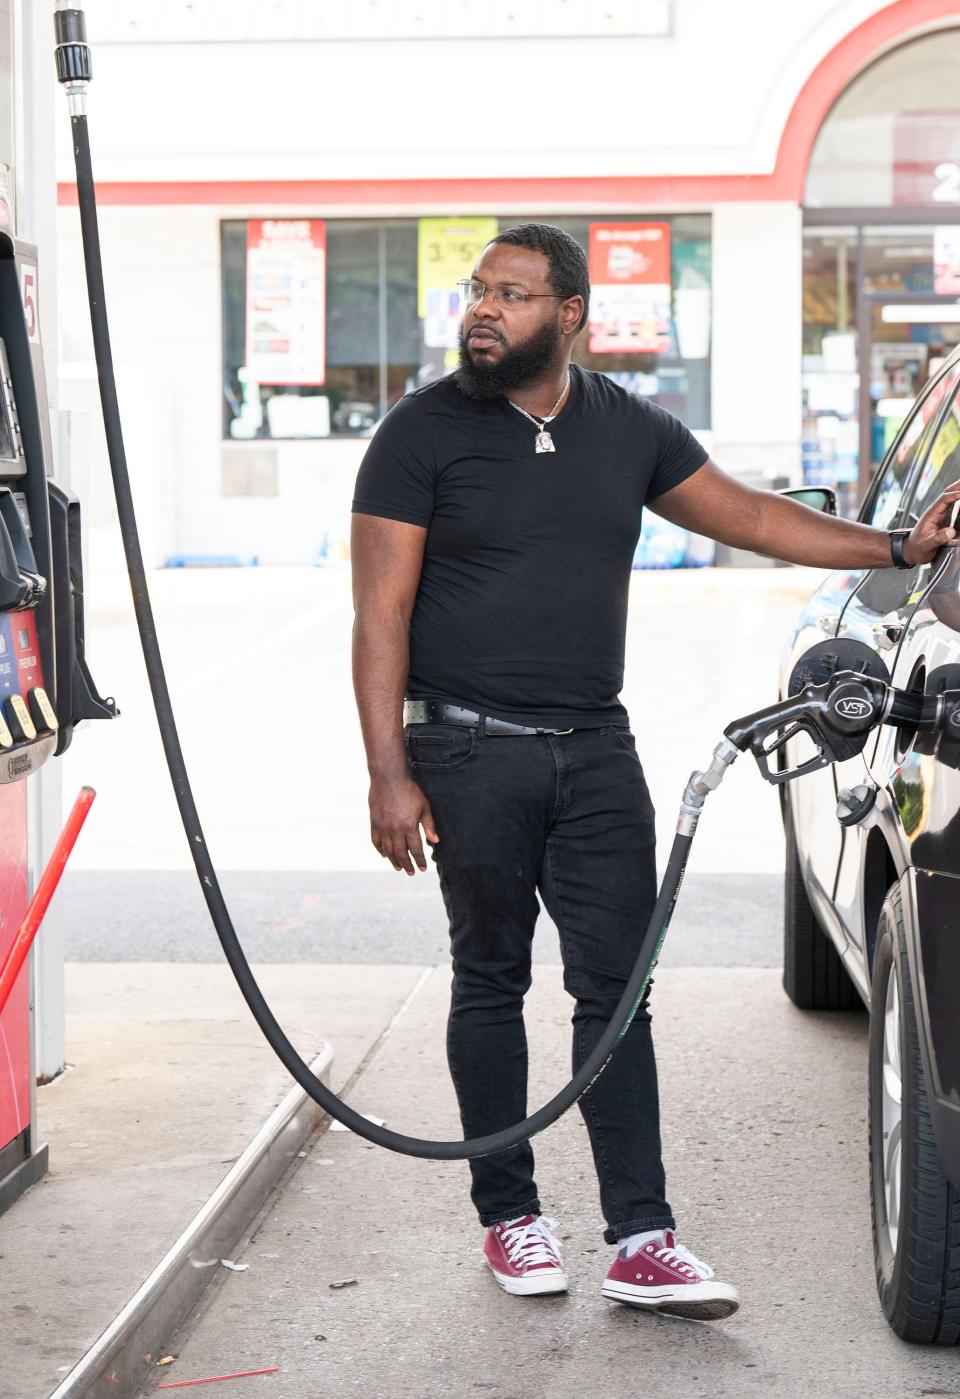 Lamar Kennedy, from Bristol, filling up at the Speedway gas station on Veterans Highway in Bristol on Monday, July 31, 2023.